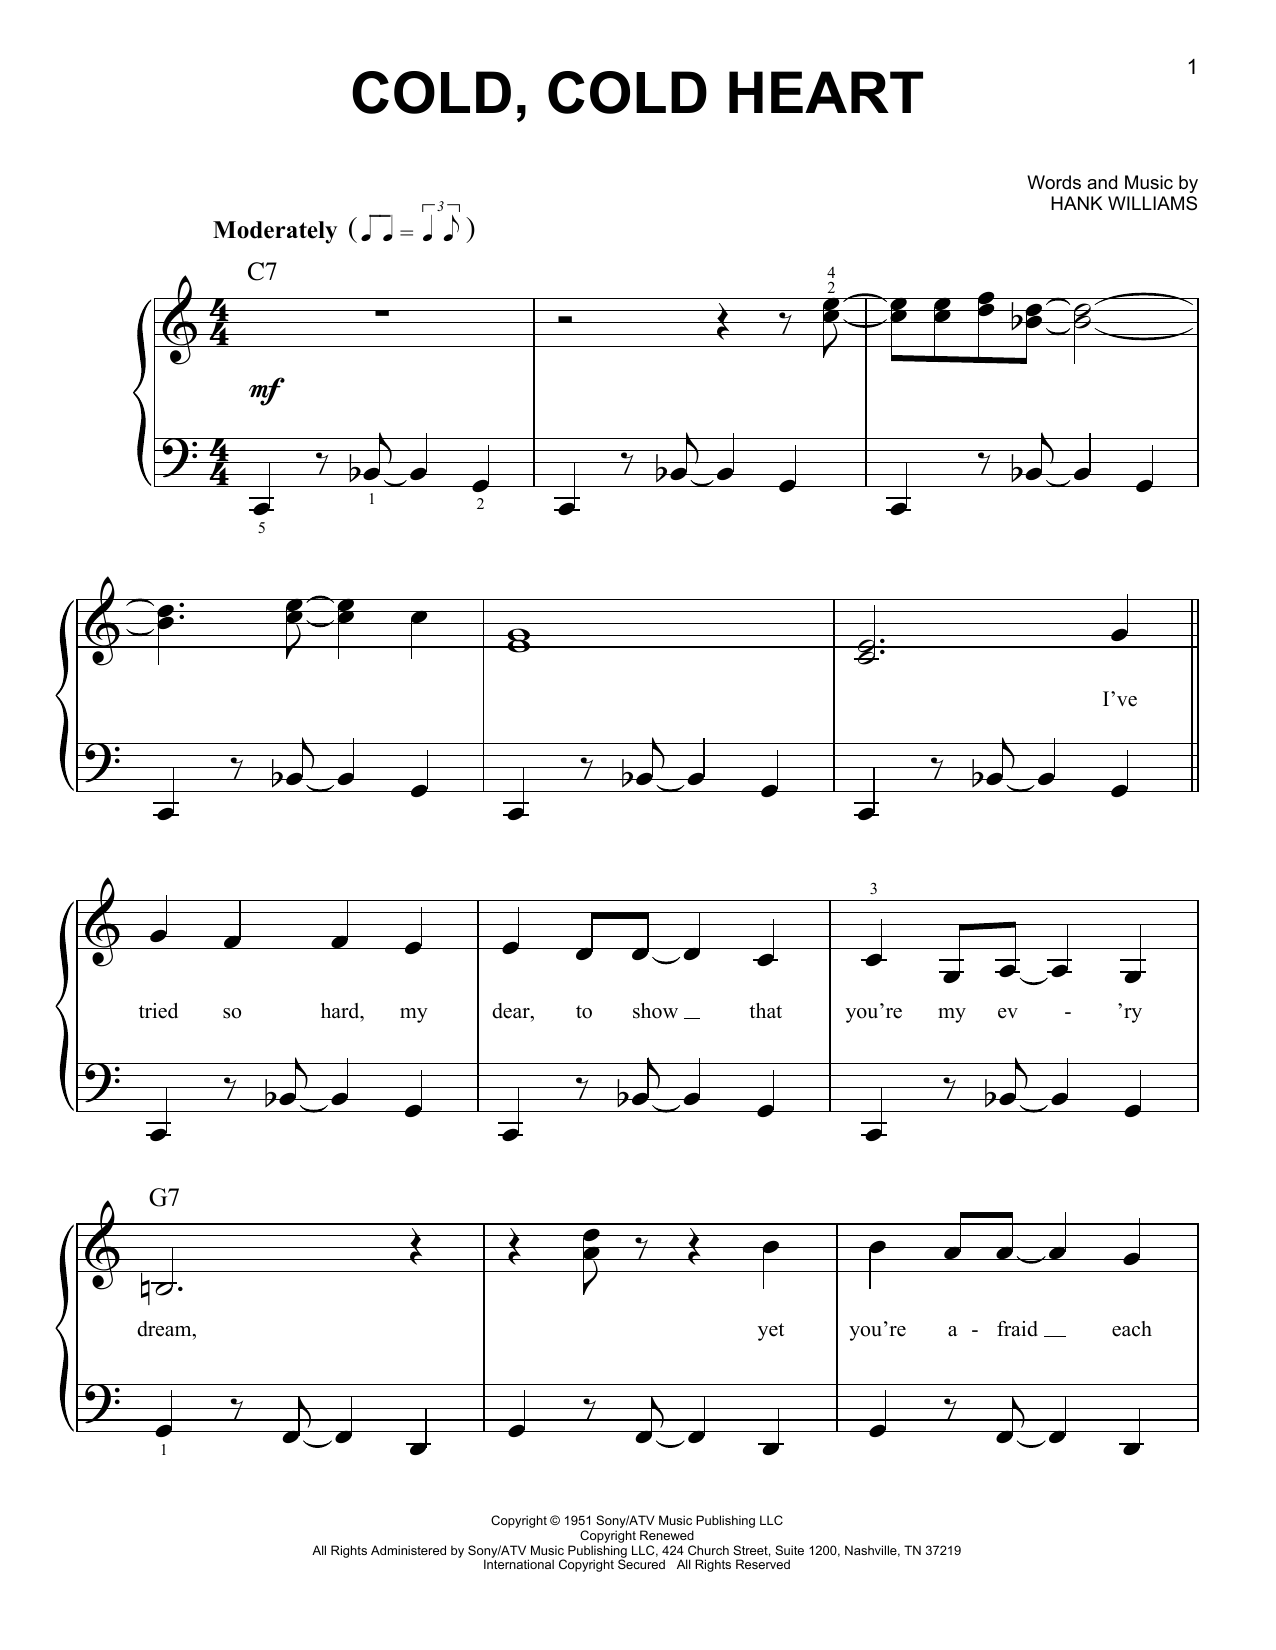 Cold, Cold Heart sheet music